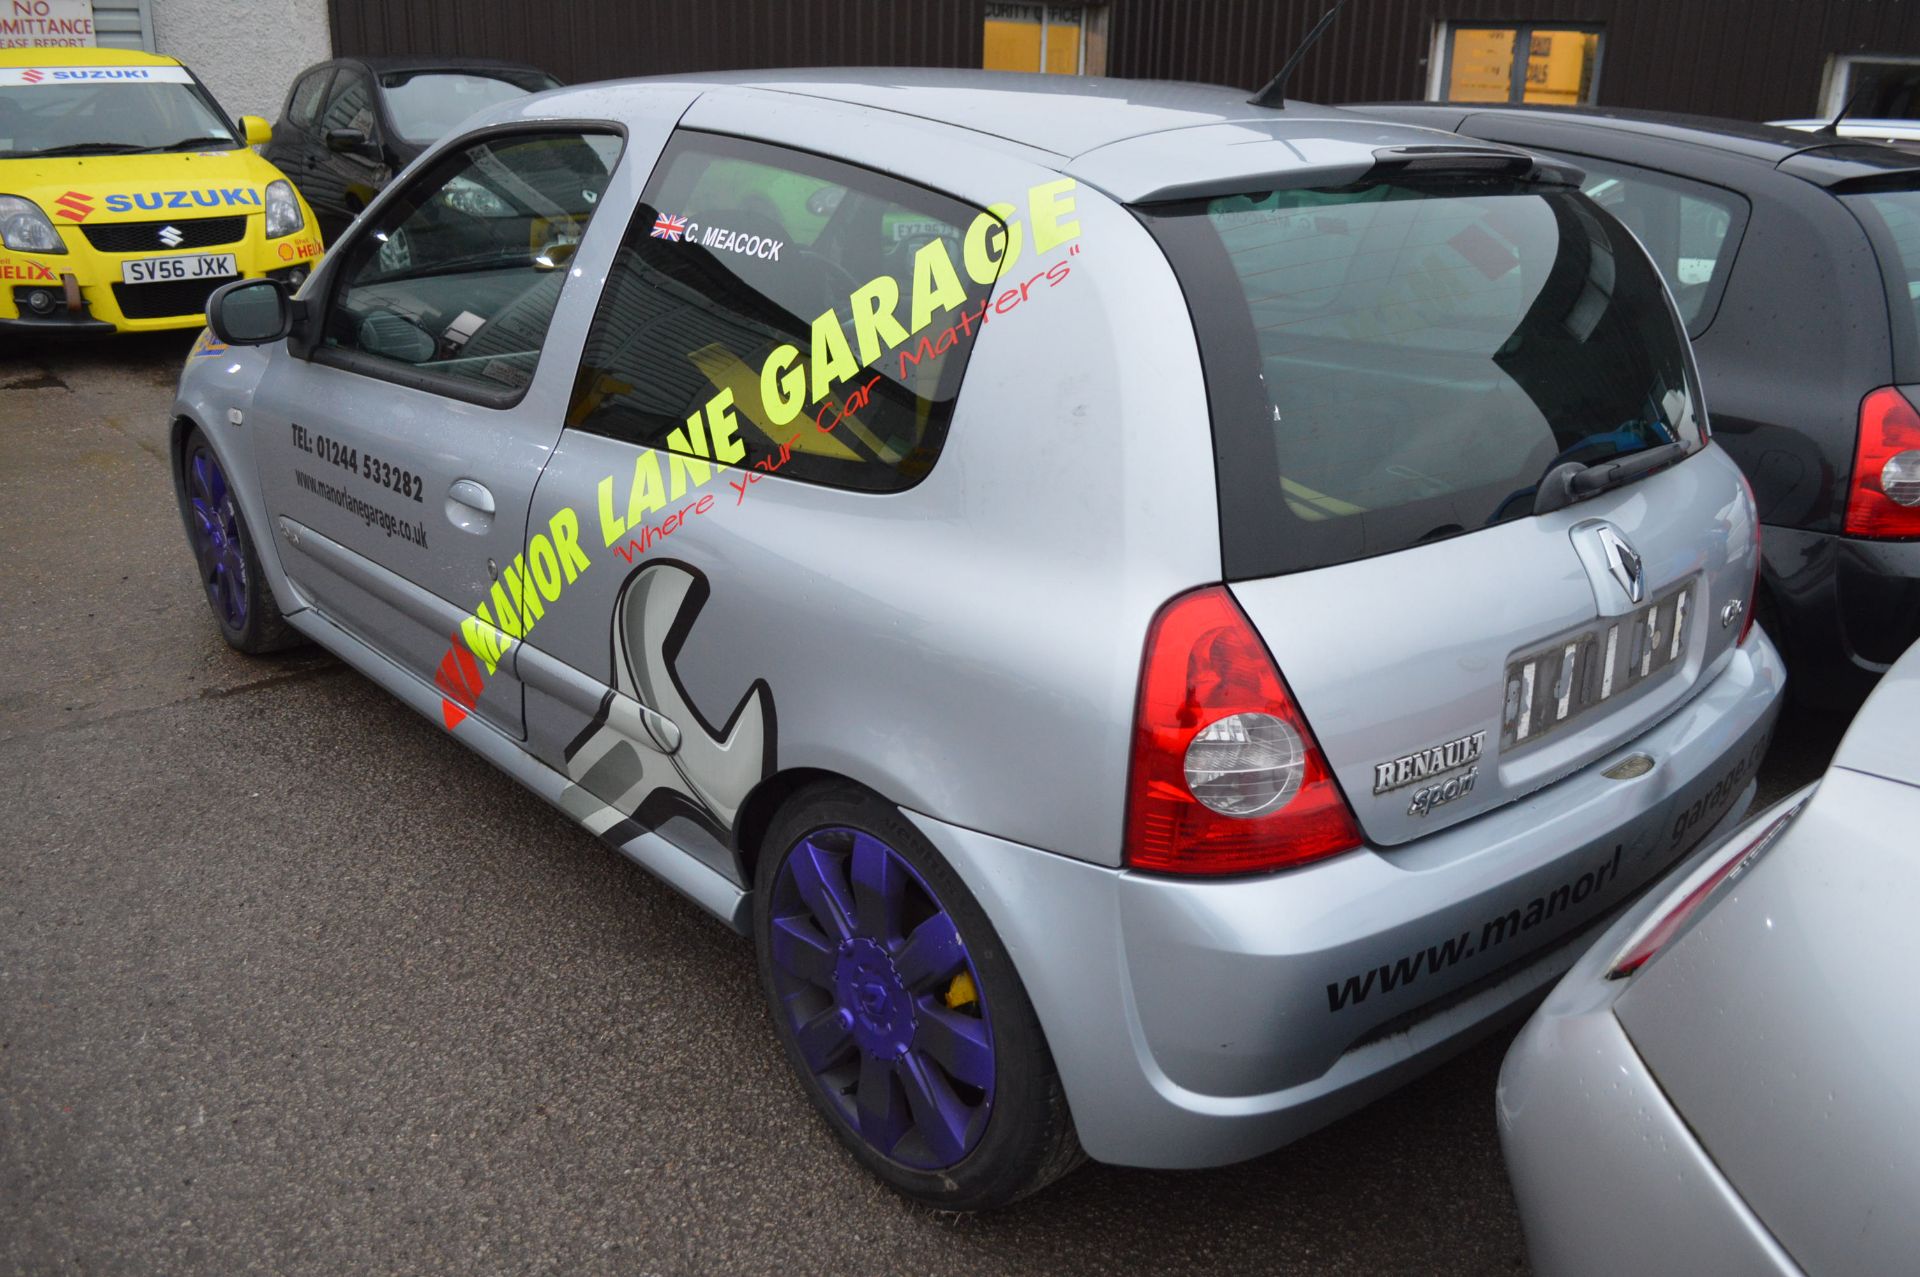 2002/02 REG RENAULT CLIO 2.0 SPORT TRACK/RACE CAR STRIPPED FOR TRACK DAYS - Image 4 of 14